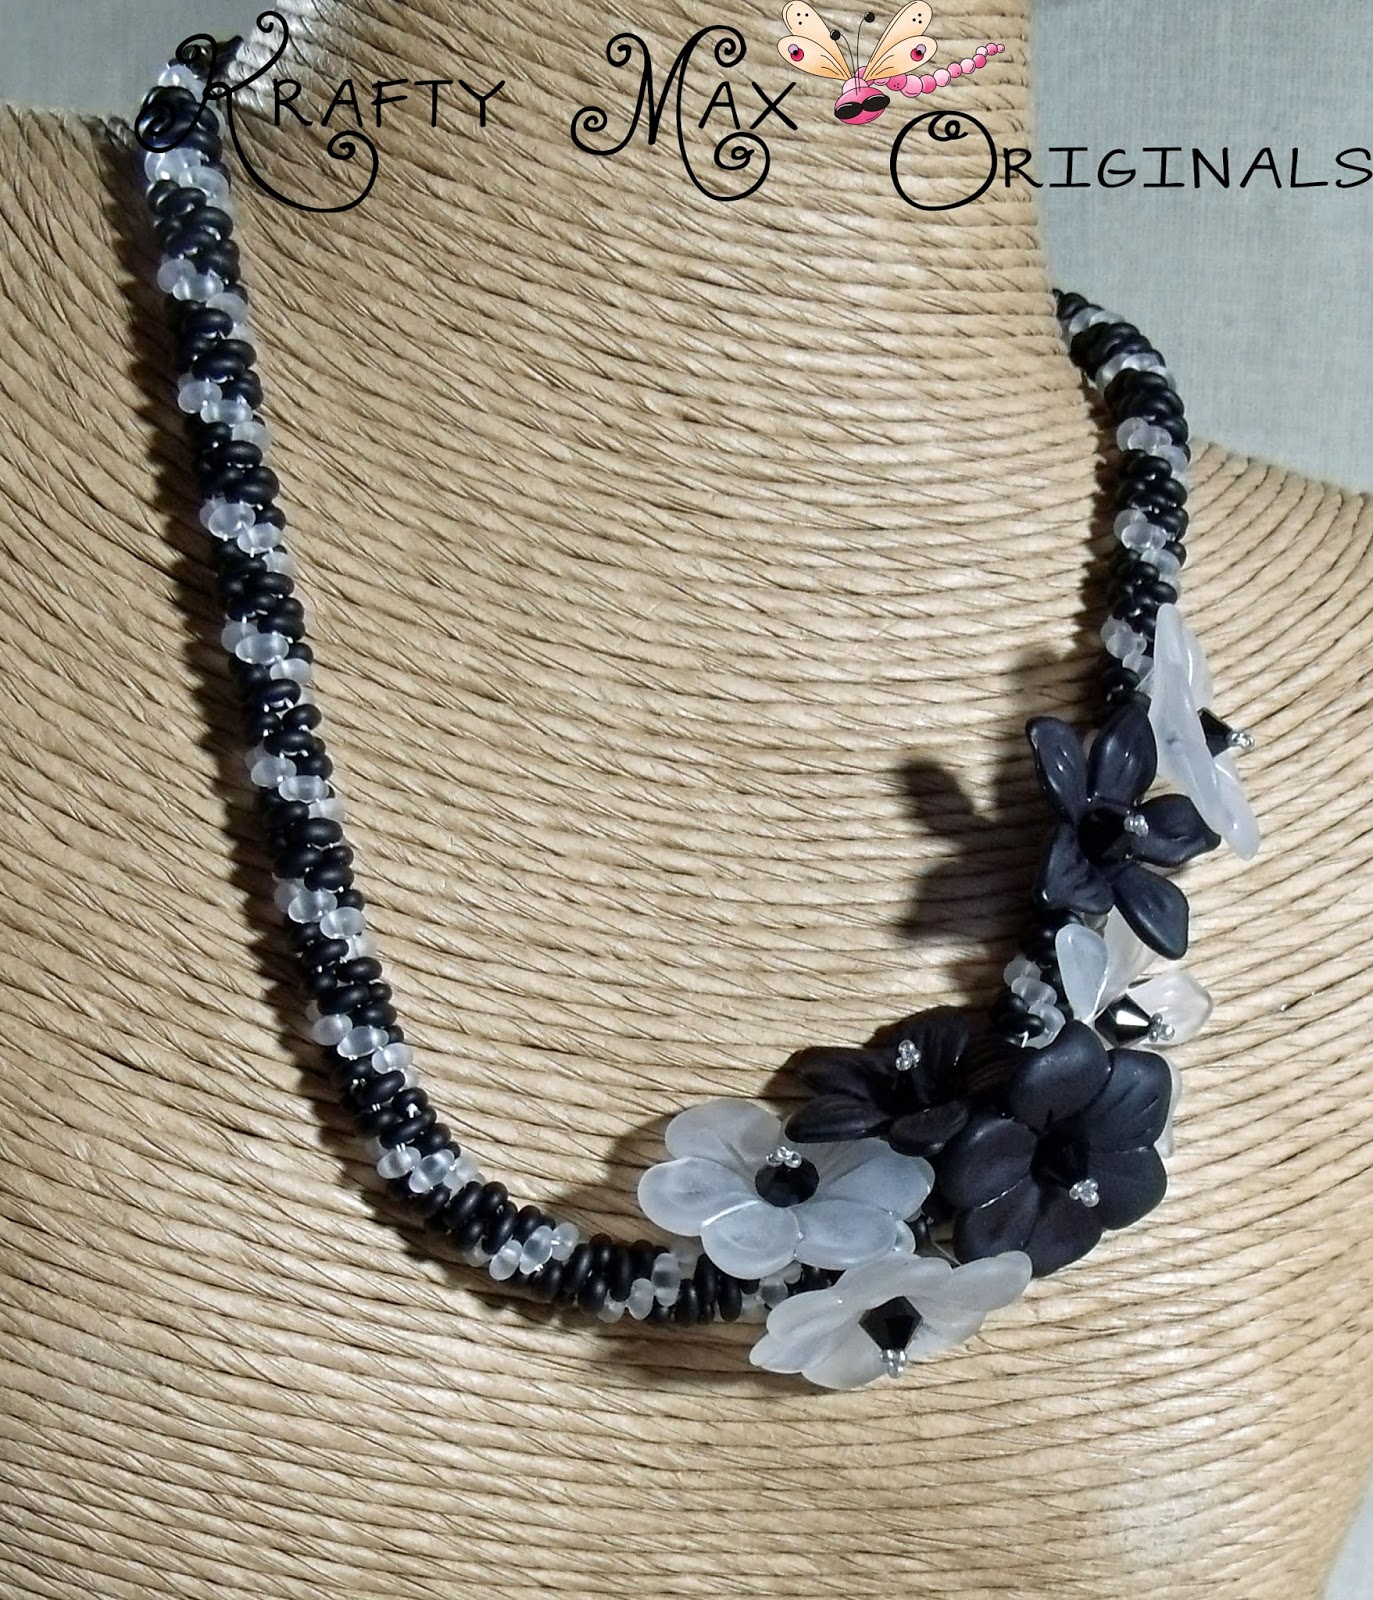 http://www.lajuliet.com/index.php/2013-01-04-15-21-51/ad/beadwork,46/exclusive-black-and-white-flowery-grace-beadwoven-necklace-a-krafty-max-original-design,346